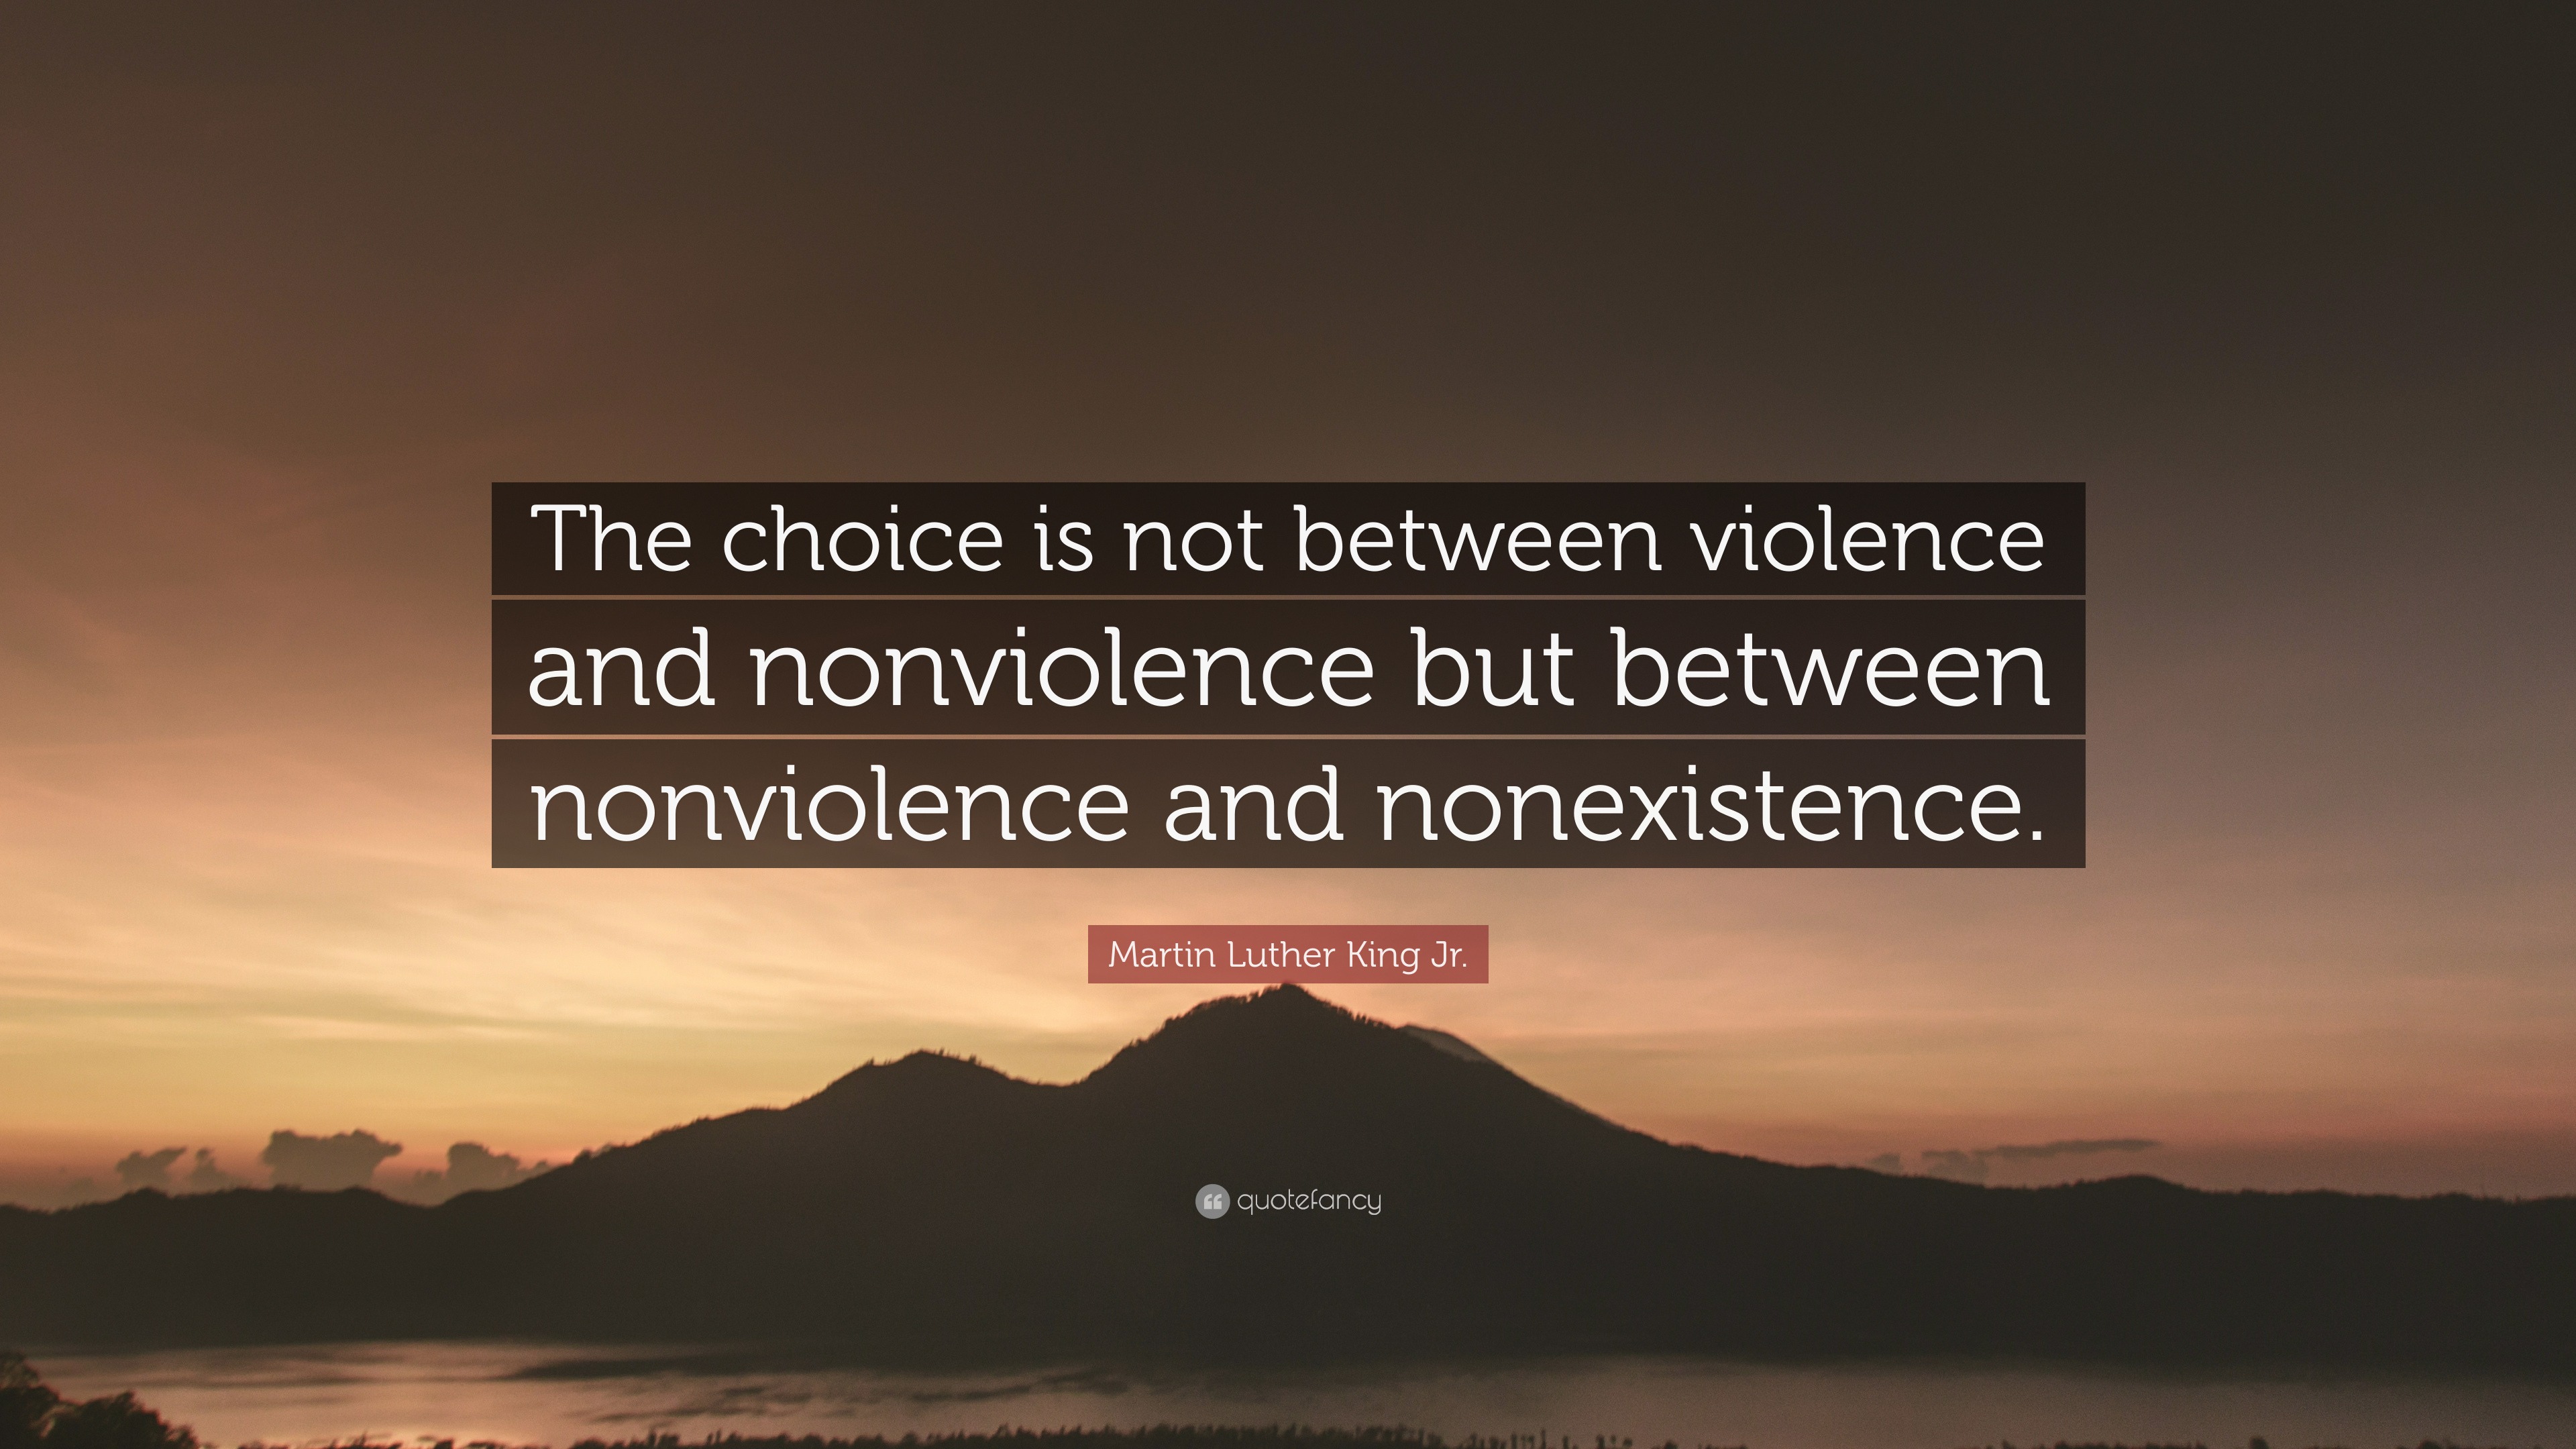 https://quotefancy.com/media/wallpaper/3840x2160/2062158-Martin-Luther-King-Jr-Quote-The-choice-is-not-between-violence-and.jpg